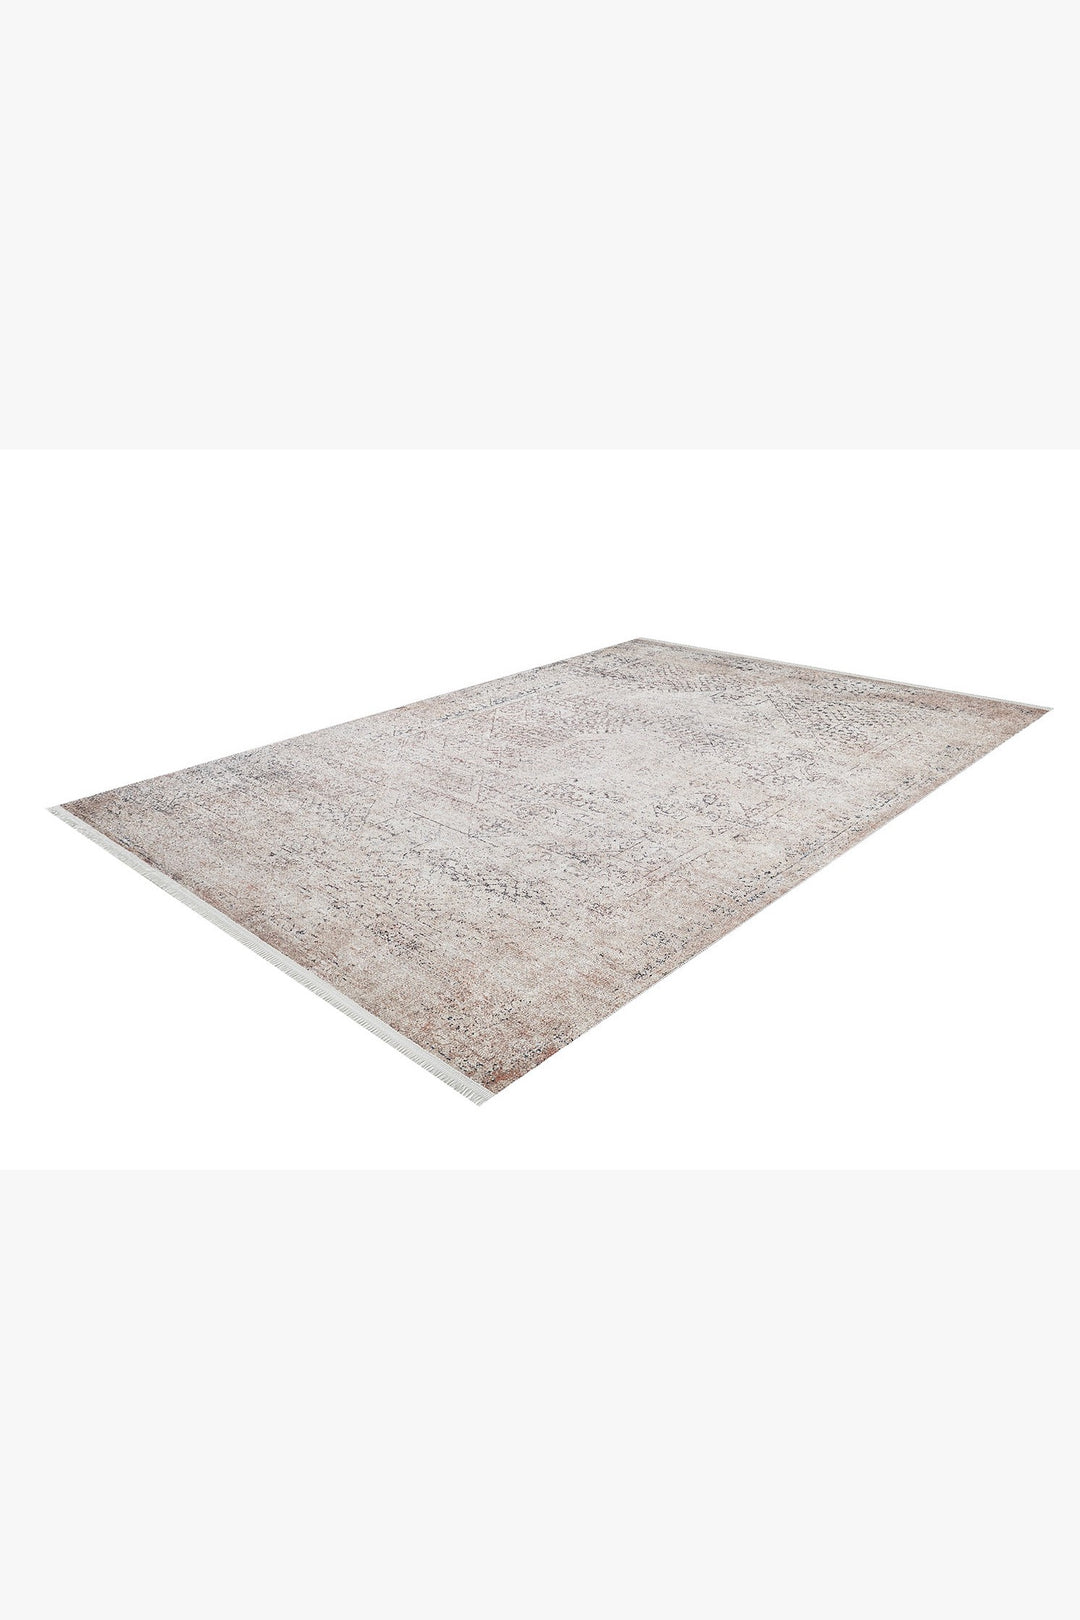 machine-washable-area-rug-Erased-Medallion-Tone-on-Tone-Ombre-Collection-Cream-Beige-JR1690